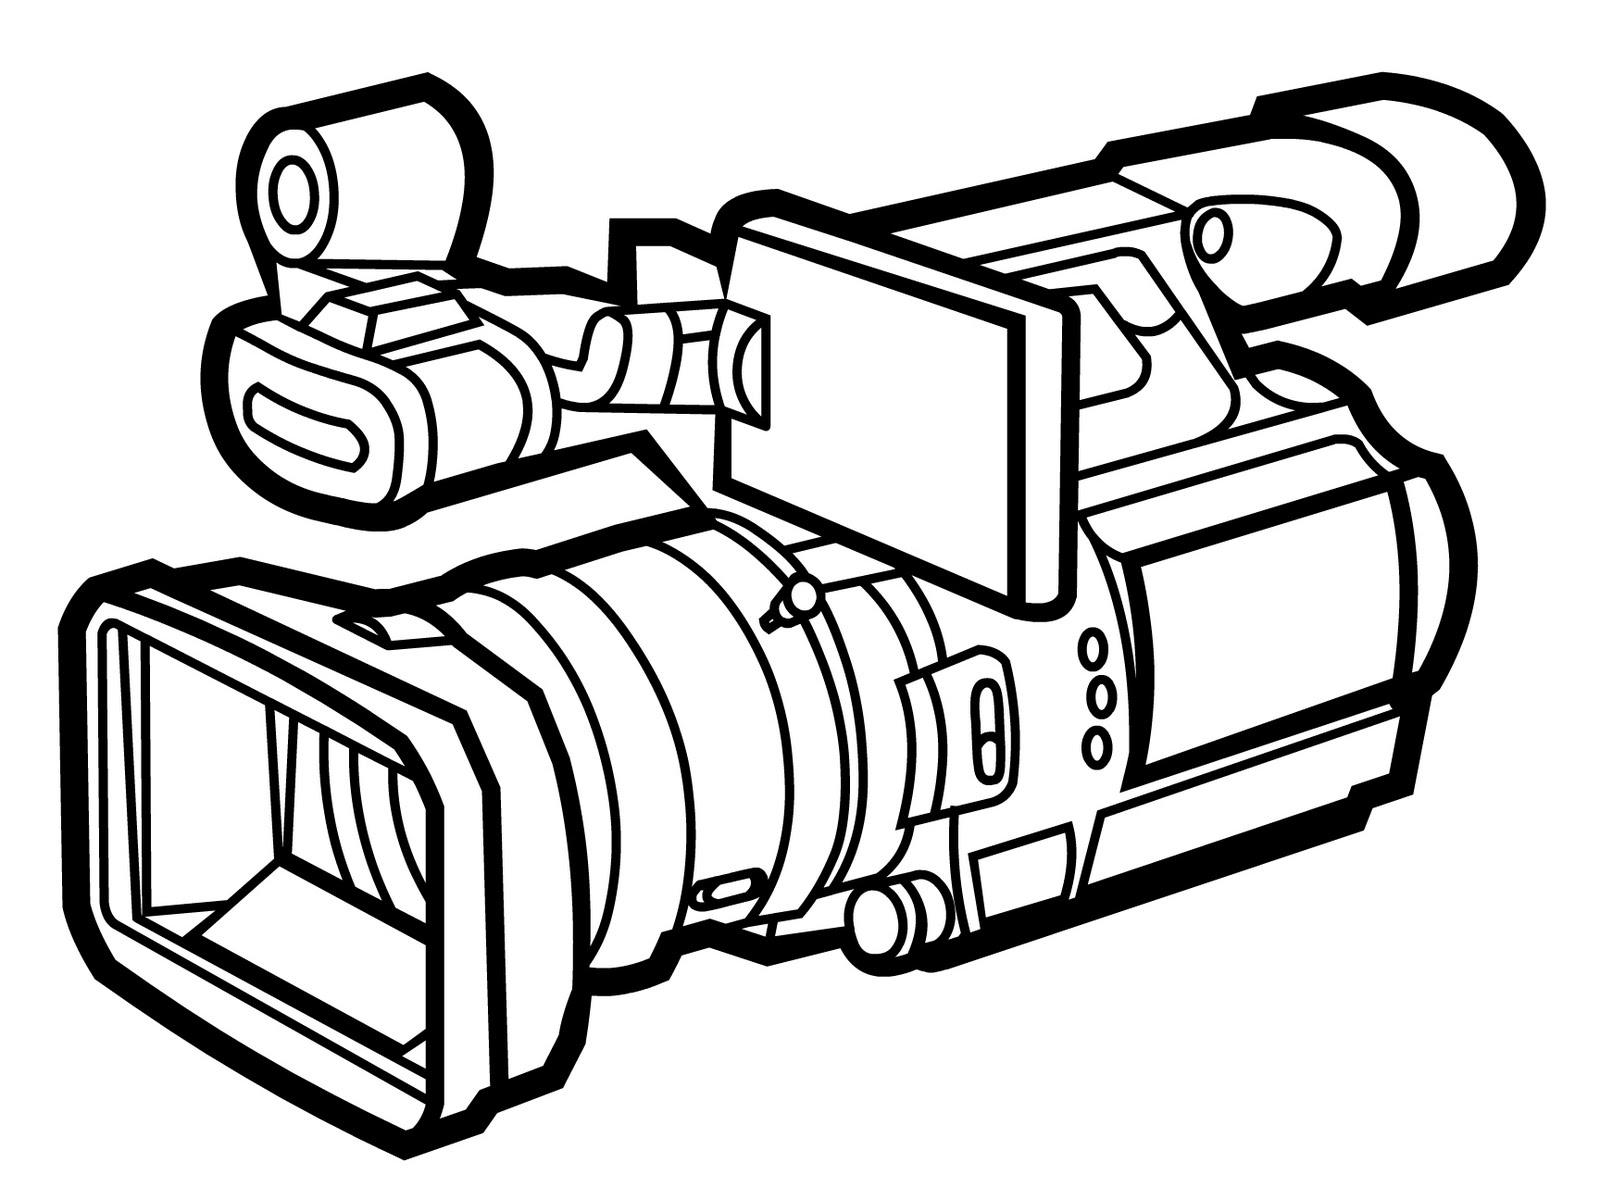 Video camera outline - ClipArt Best - ClipArt Best